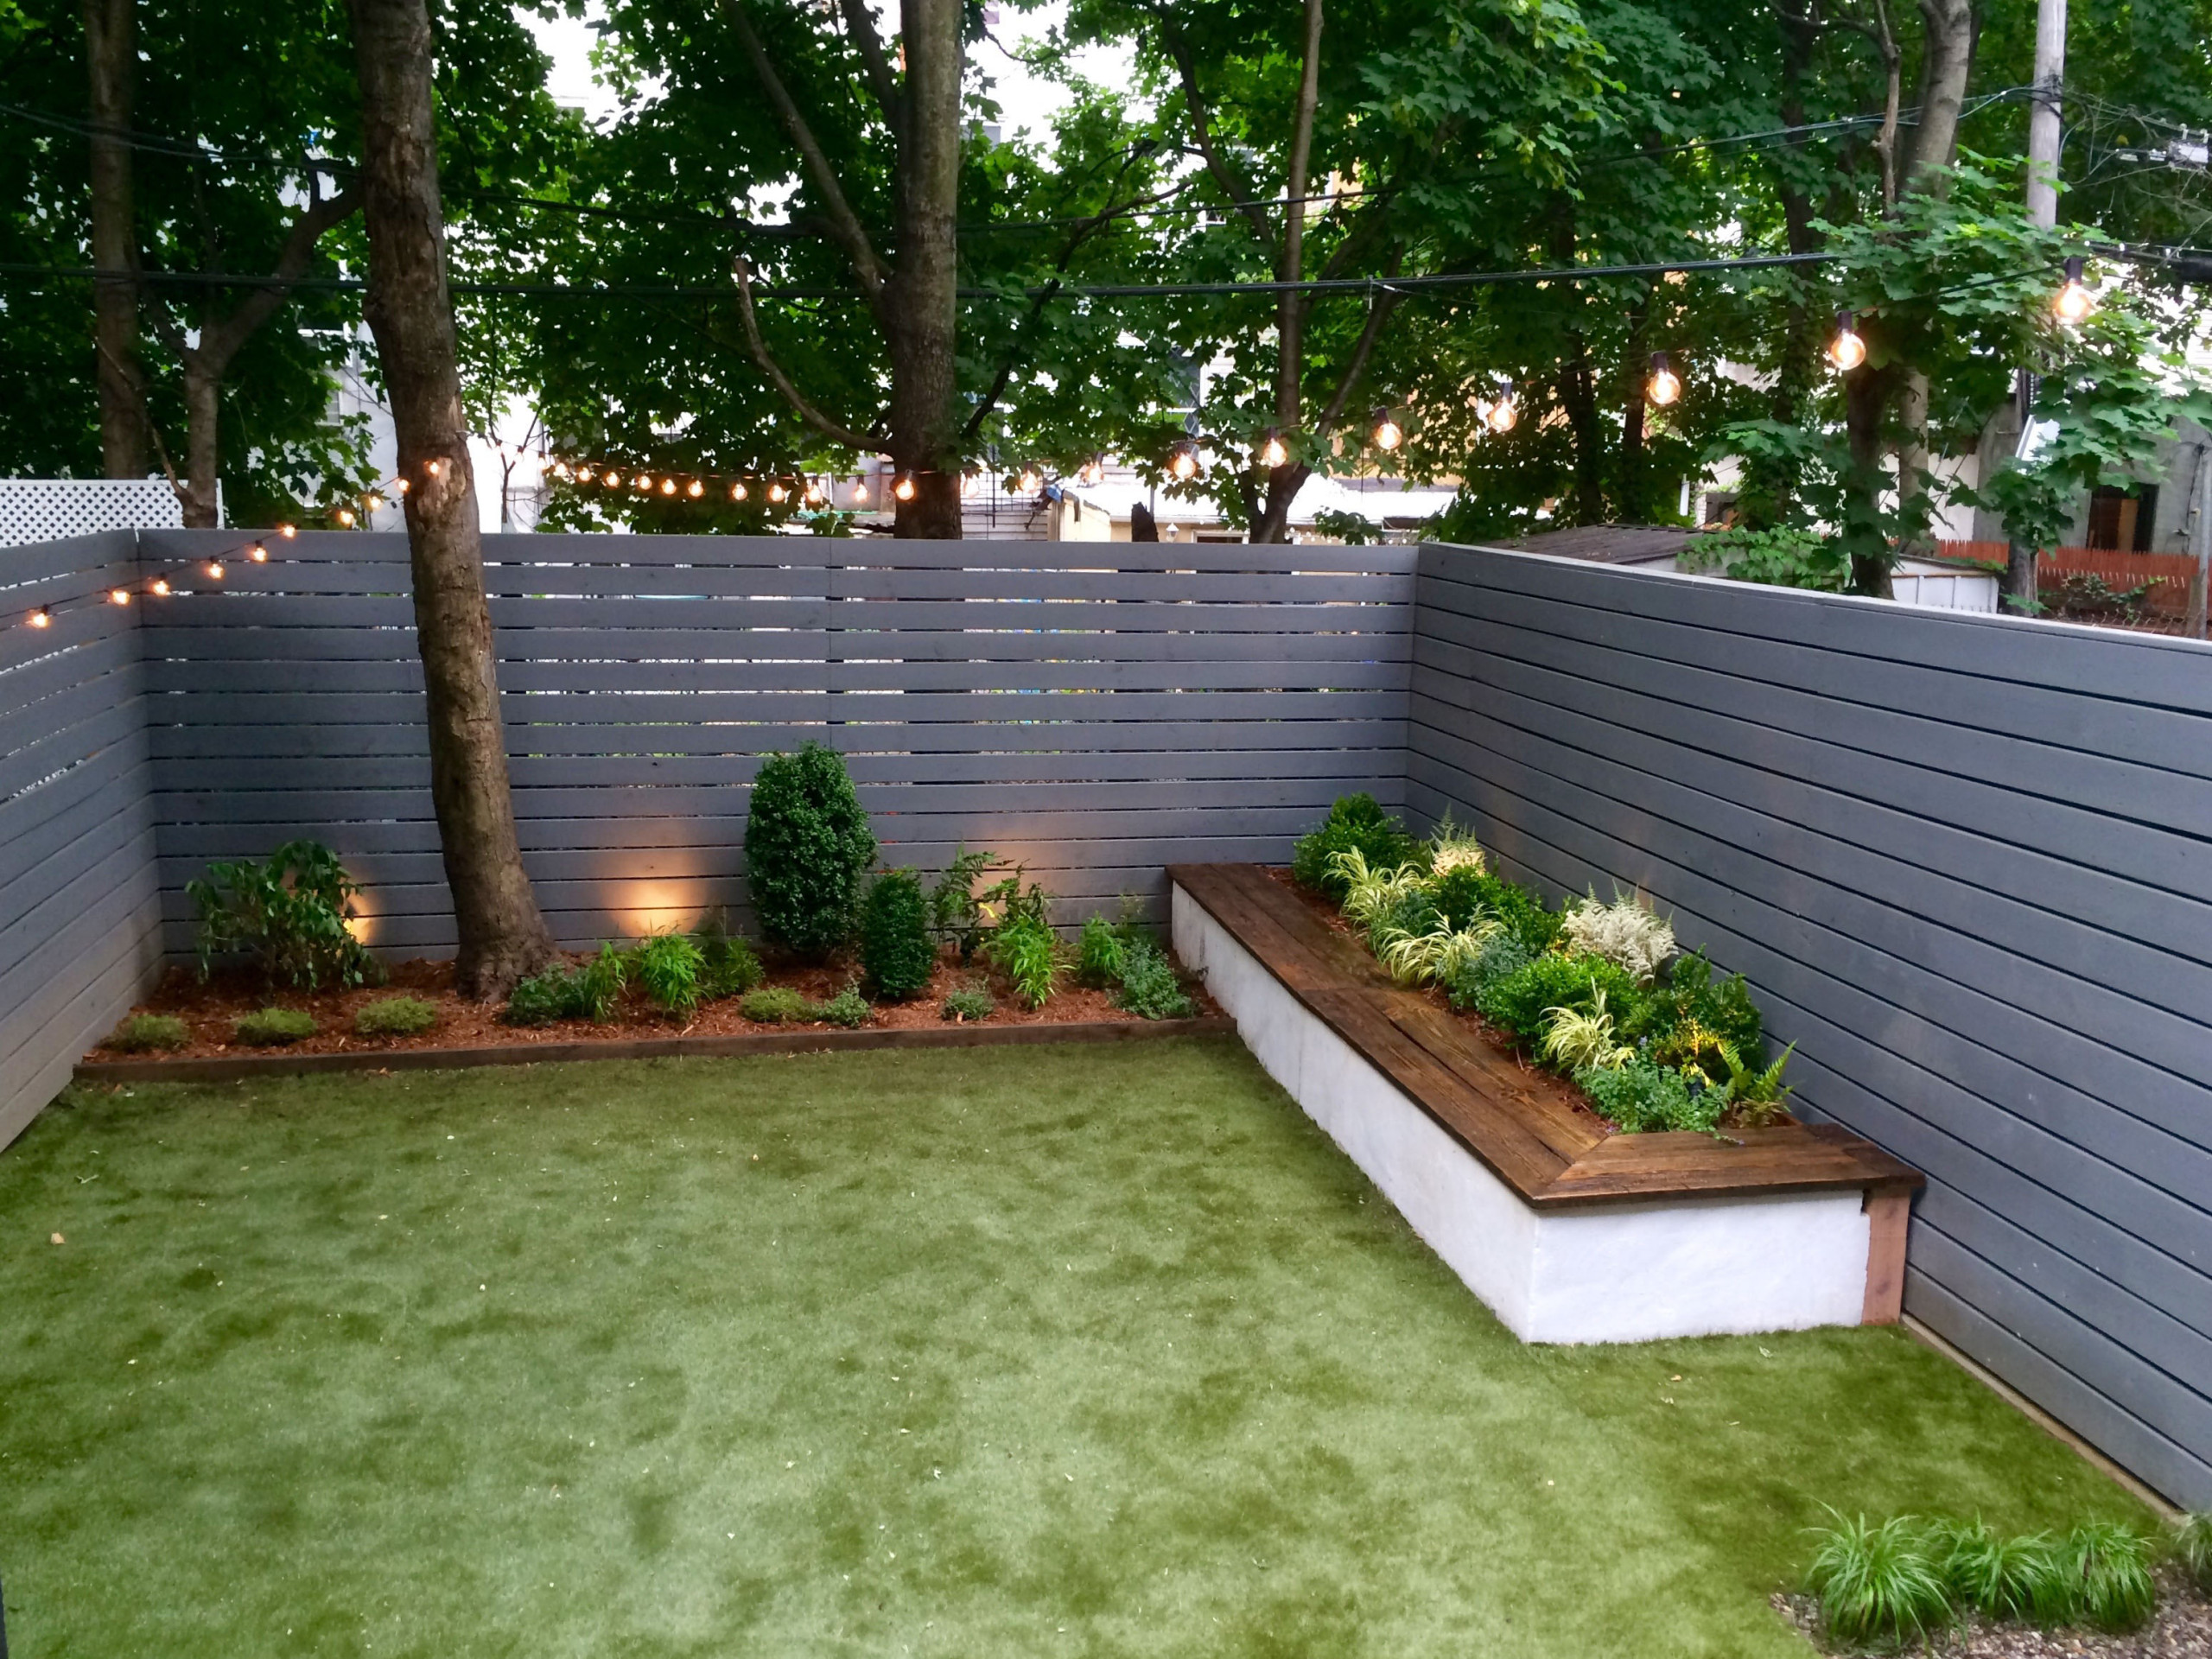 Bed Stuy Townhouse Backyard Garden Staghorn Nyc Img~dea1c0820776ae4f 14 7559 1 57d48ca 